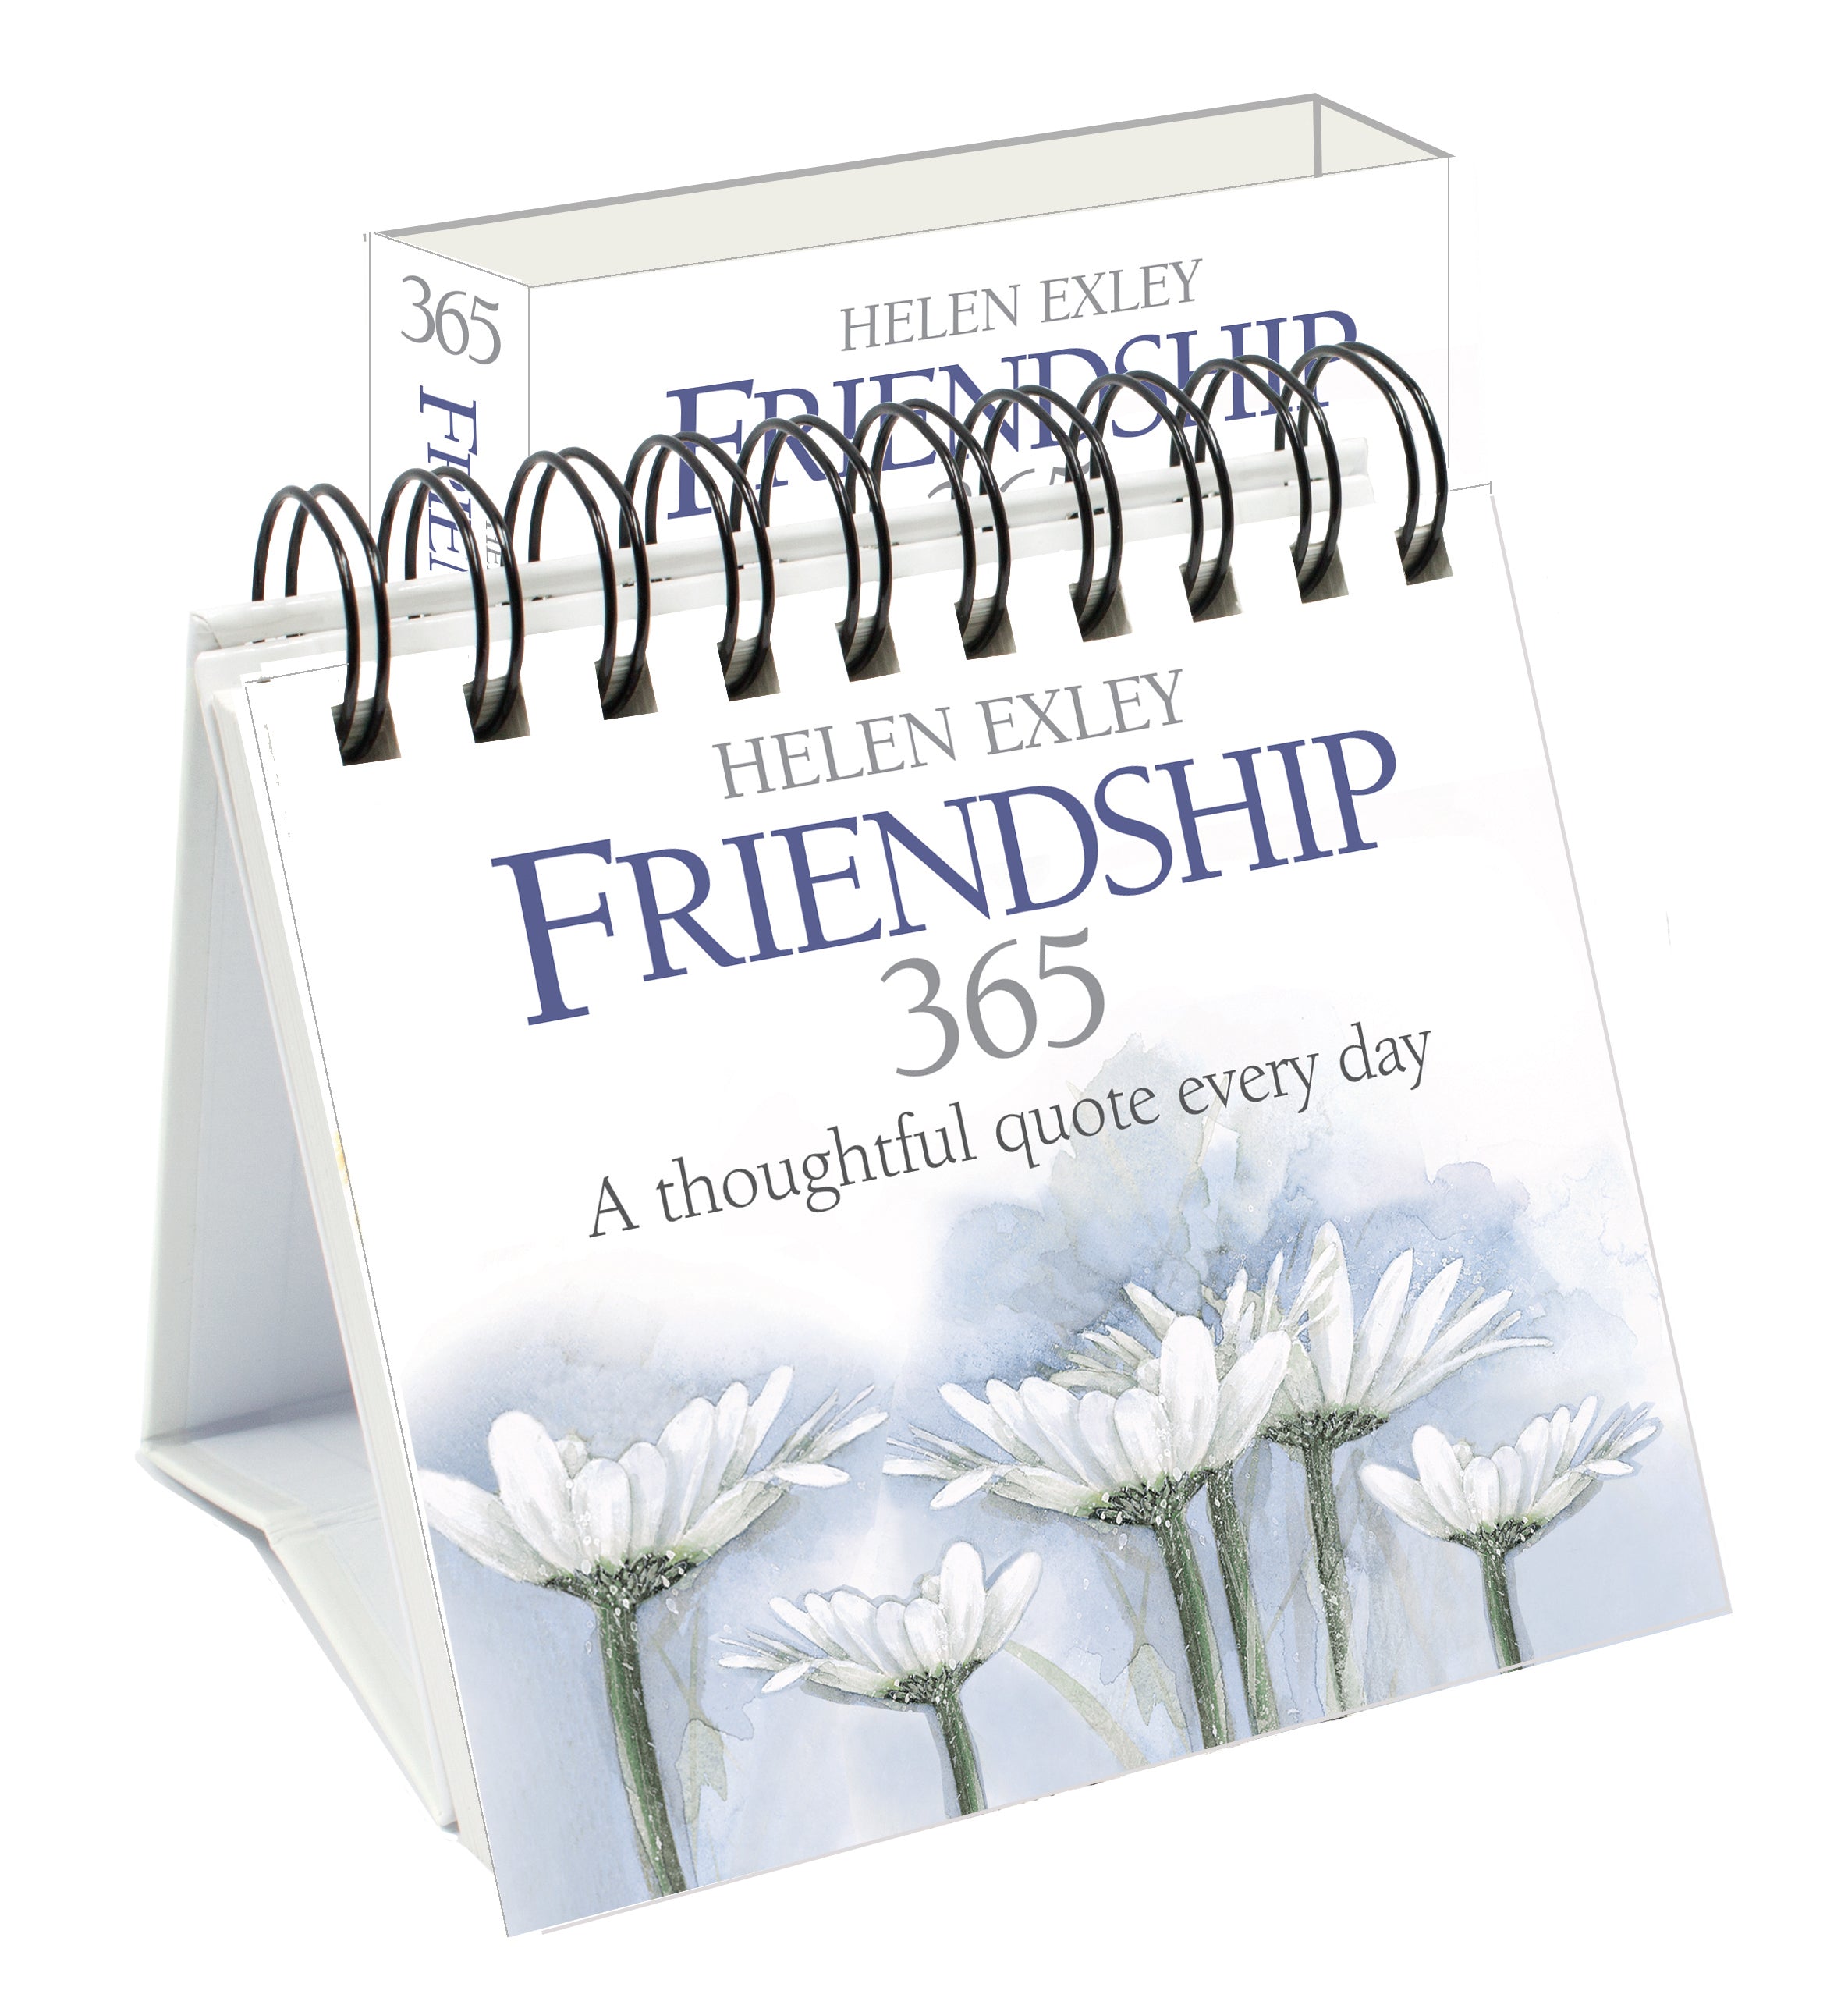 365 Friendship - A thoughtful quote every day